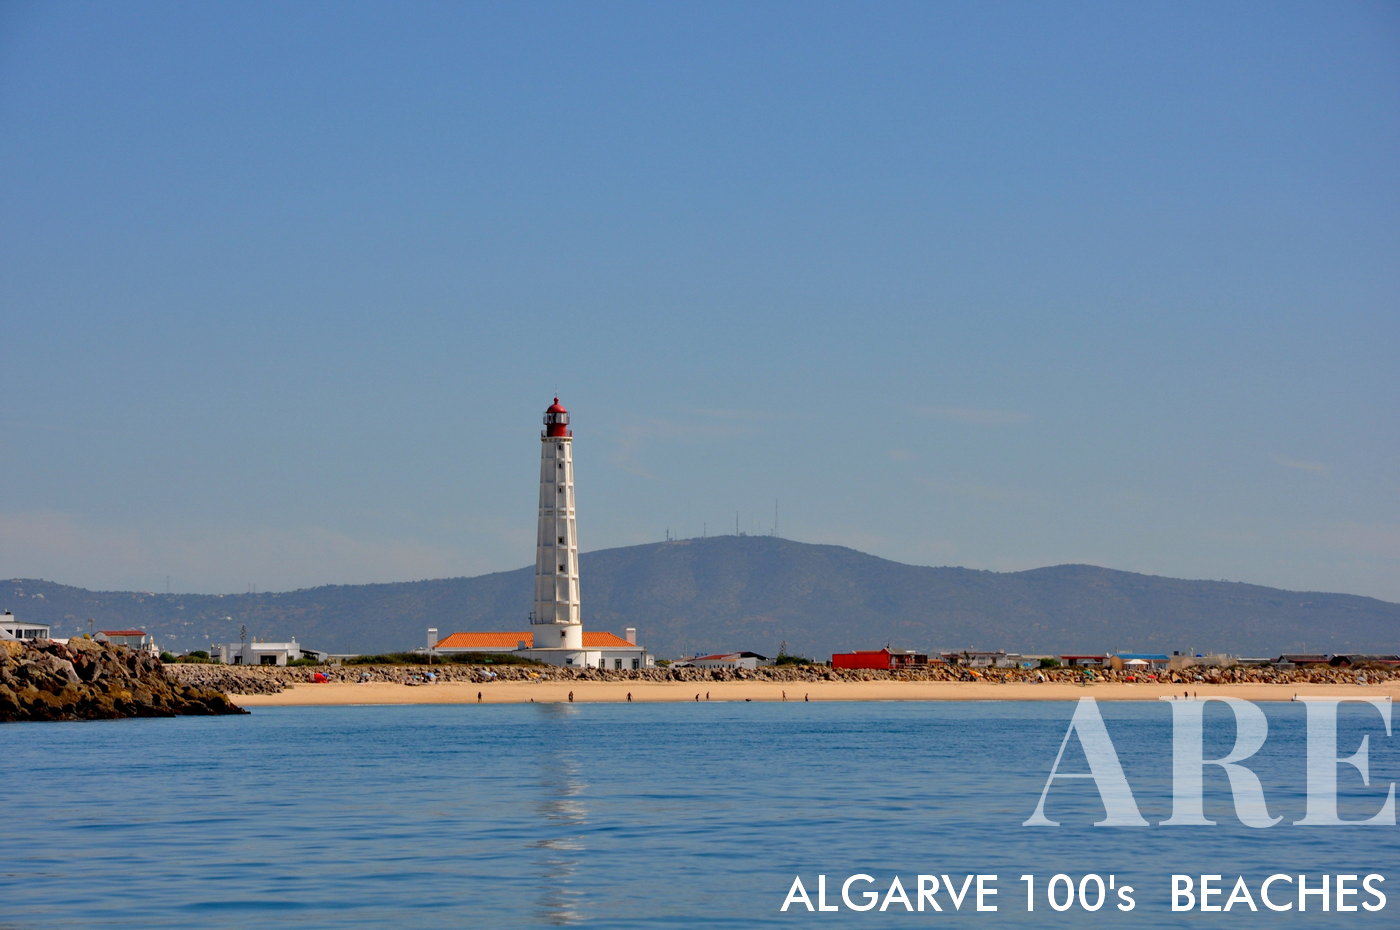 Farol Beach, located on Culatra Island in the Ria Formosa Natural Park near Faro. Farol Beach is named after the picturesque lighthouse, Farol do Cabo de Santa Maria, which stands proudly on the island. The lighthouse adds to the charm of the beach and serves as a landmark for visitors.